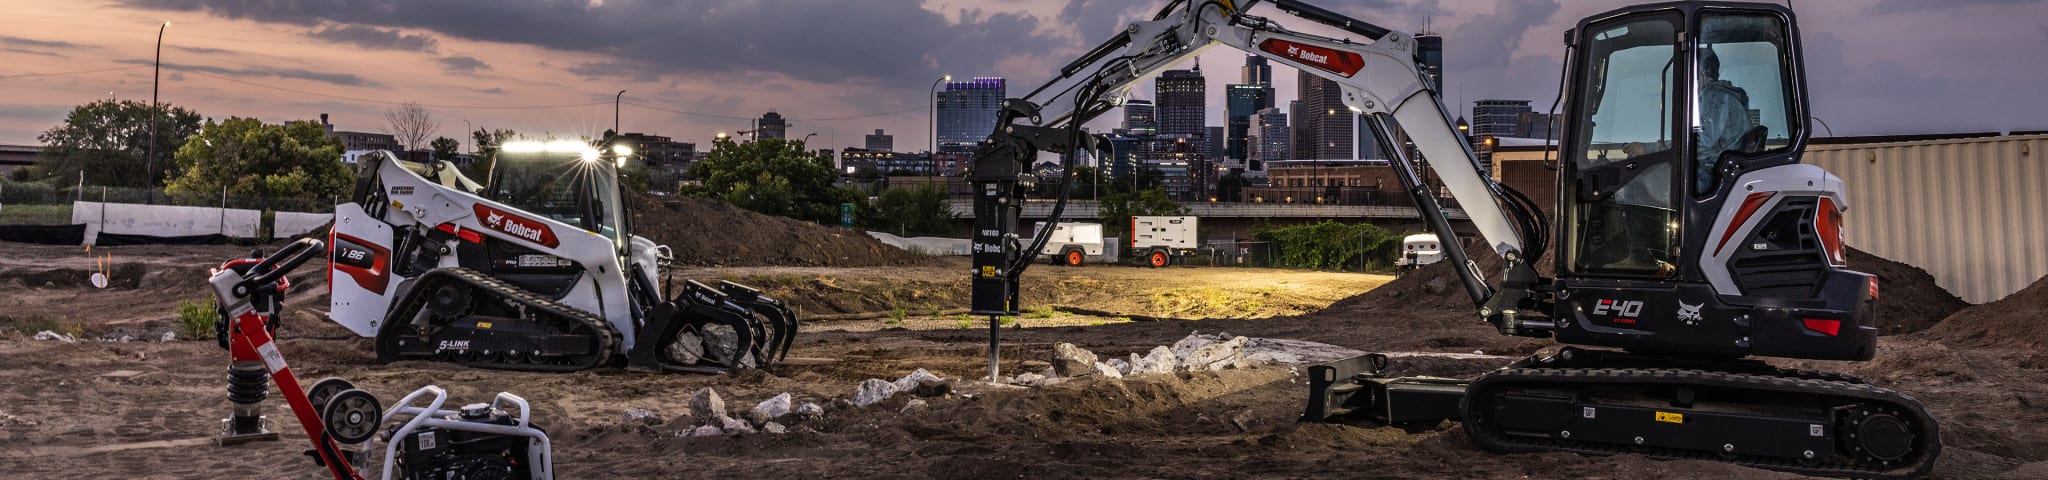 A Lineup of Bobcat Equipment Working at Dusk on an Urban Construction Site